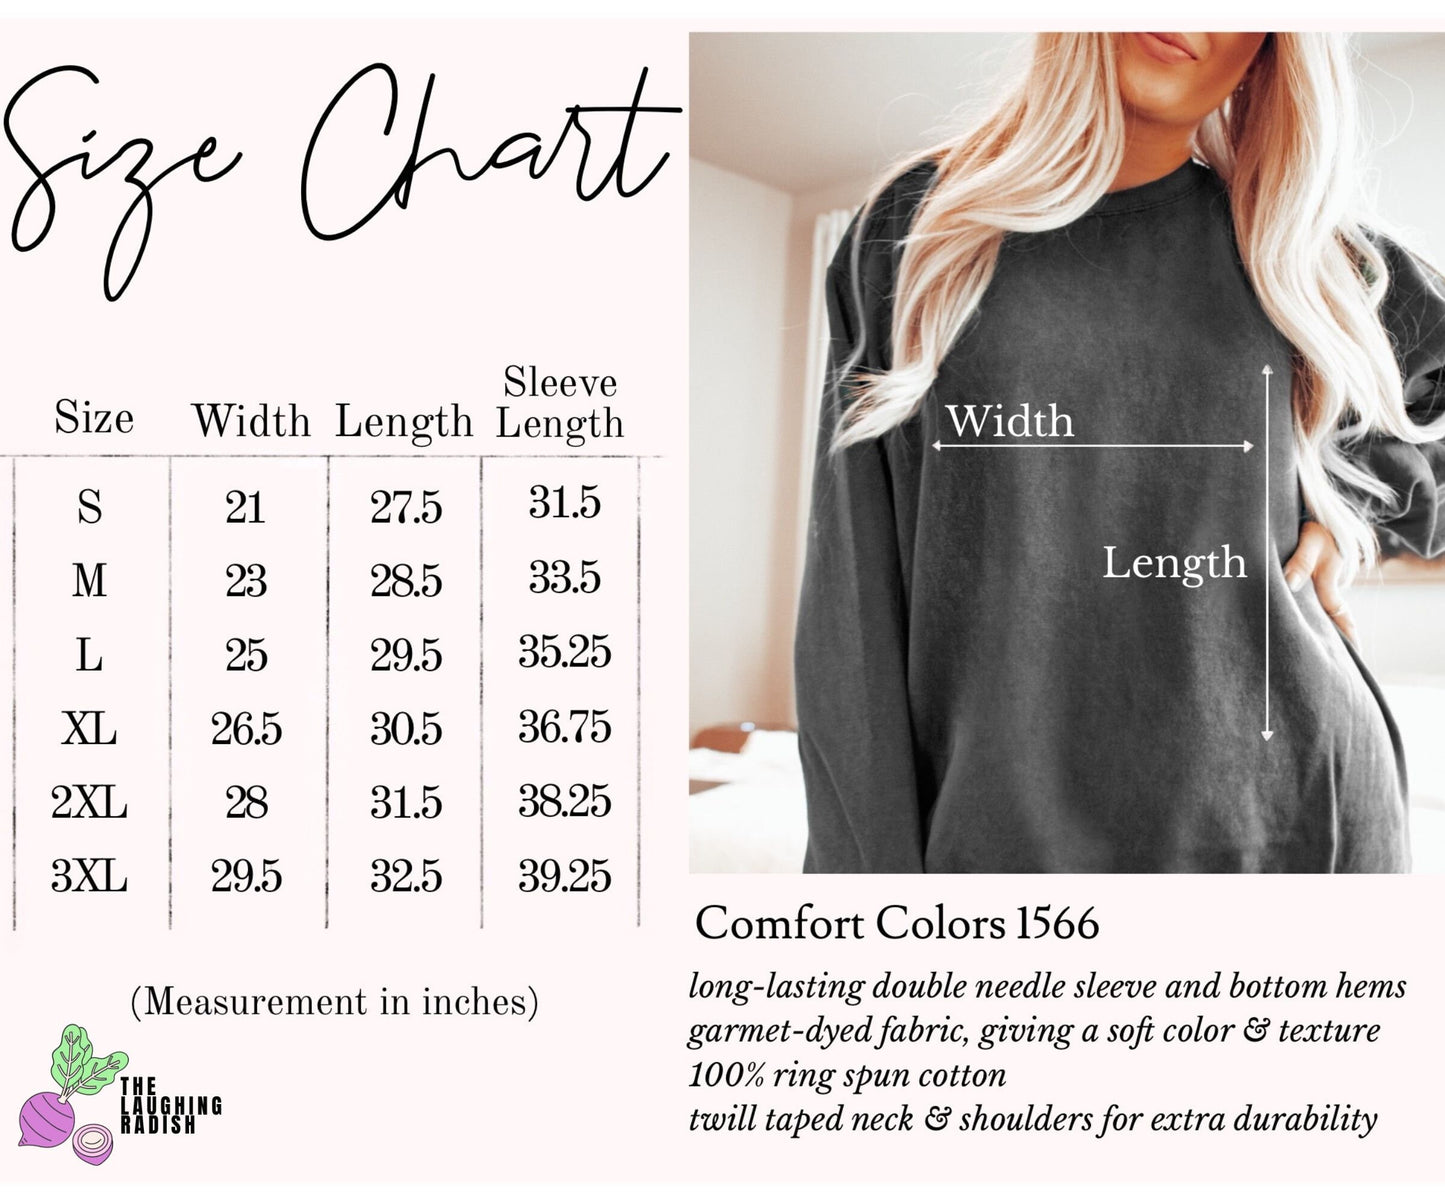 A size chart showing a model with the length and width of a shirt as reference for a potential buyer to estimate the right fit.